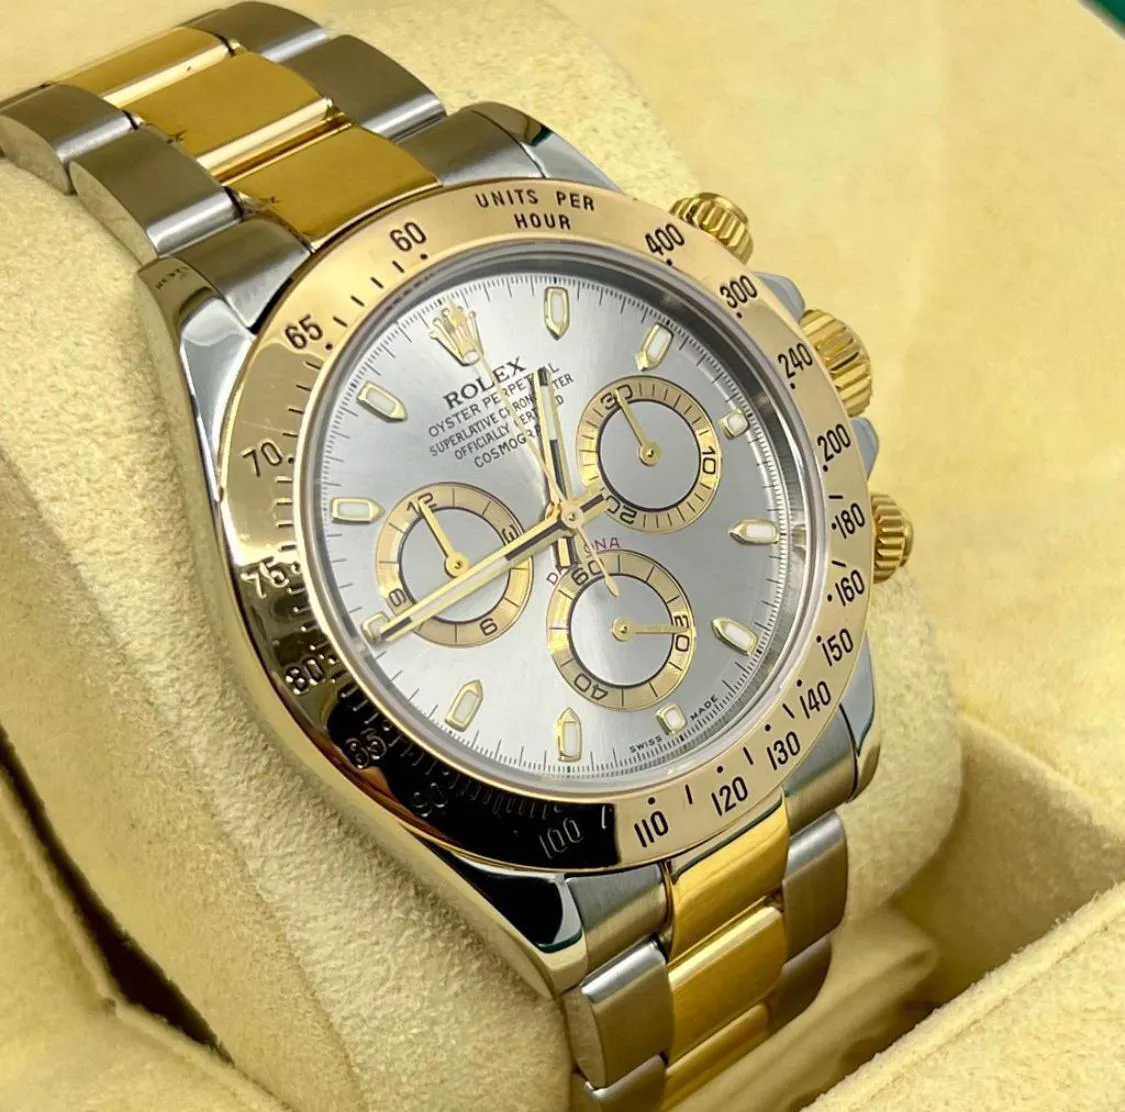 Rolex Daytona 116523 40mm Gold and stainless steel